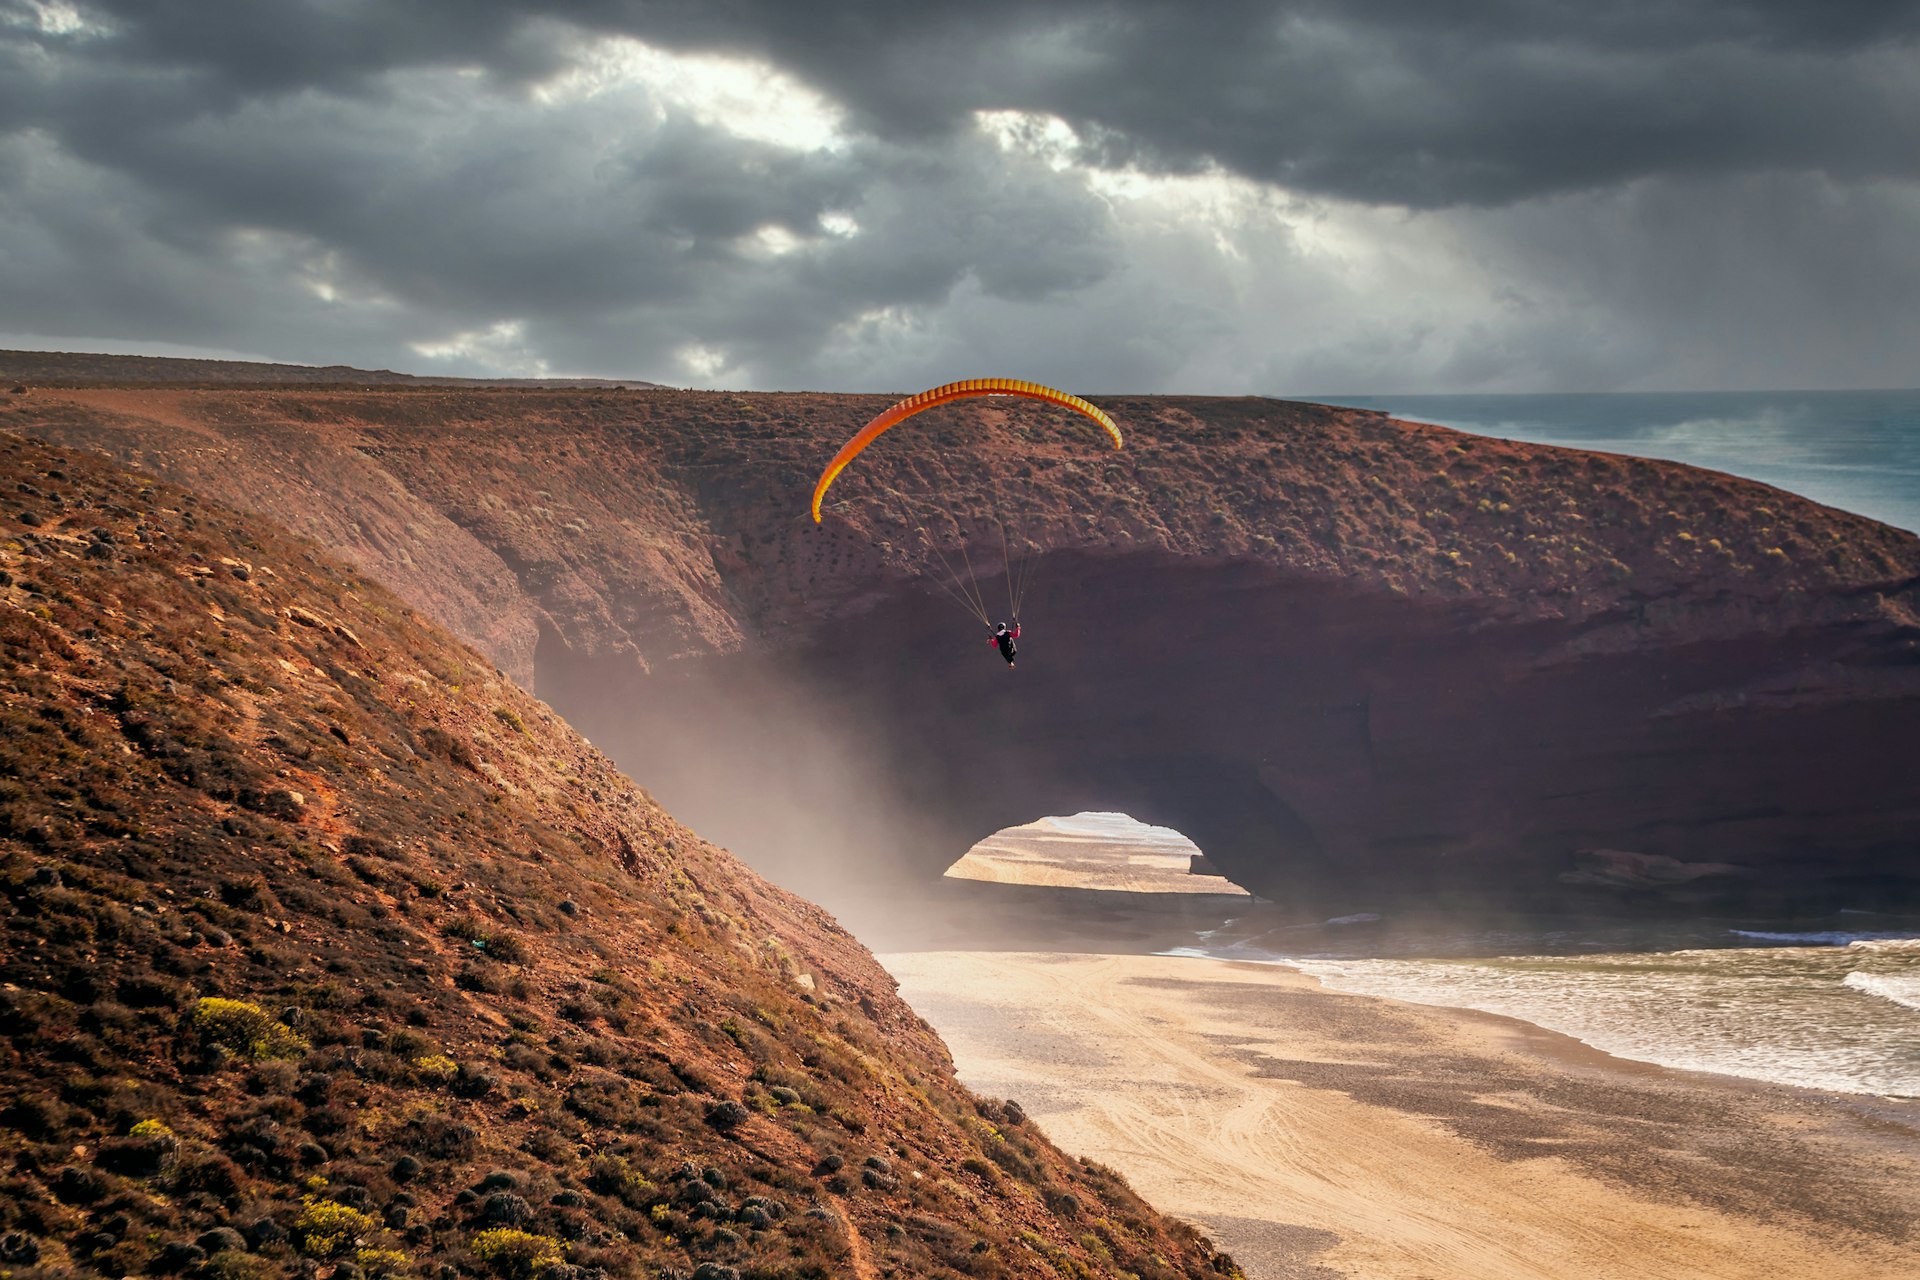 A paraglider drops down onto the red sand next to the land arch of Legzira beach, in Morocco at sunset as wind whips up the grains of sand